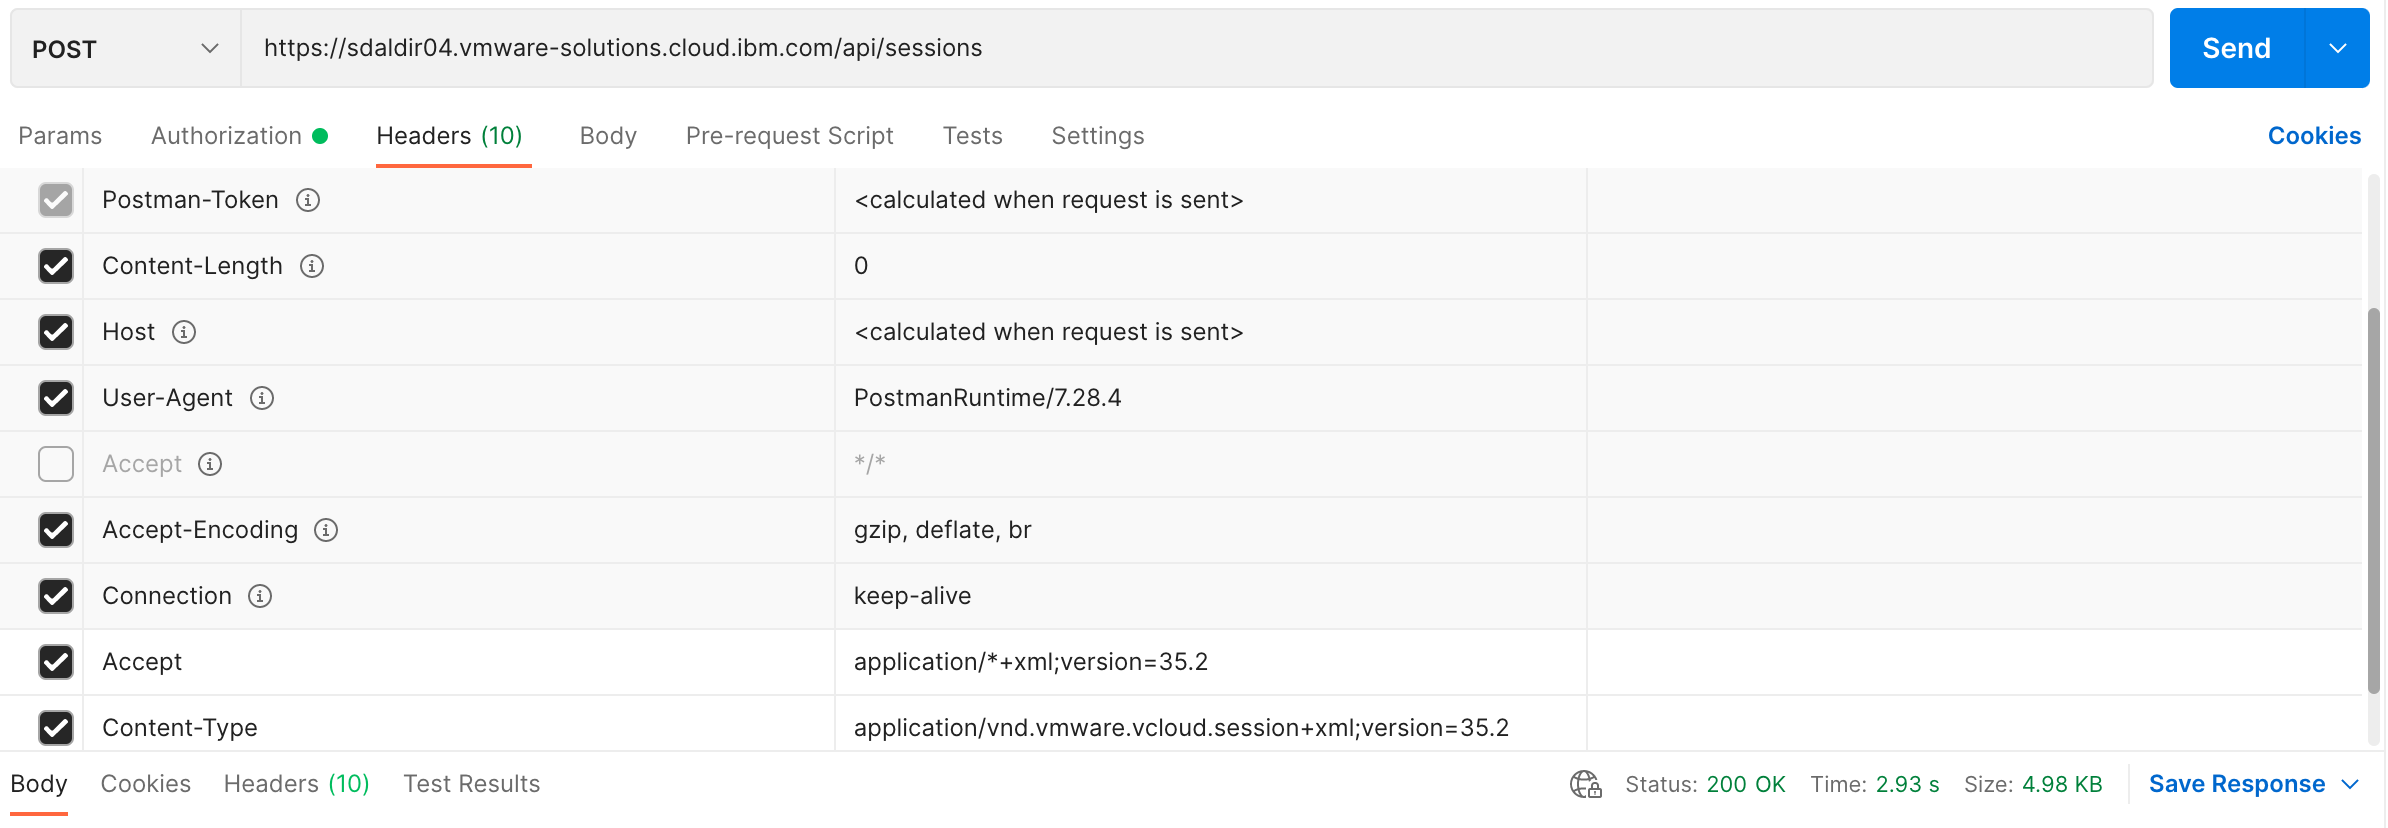 POST vCD API Sessions Headers